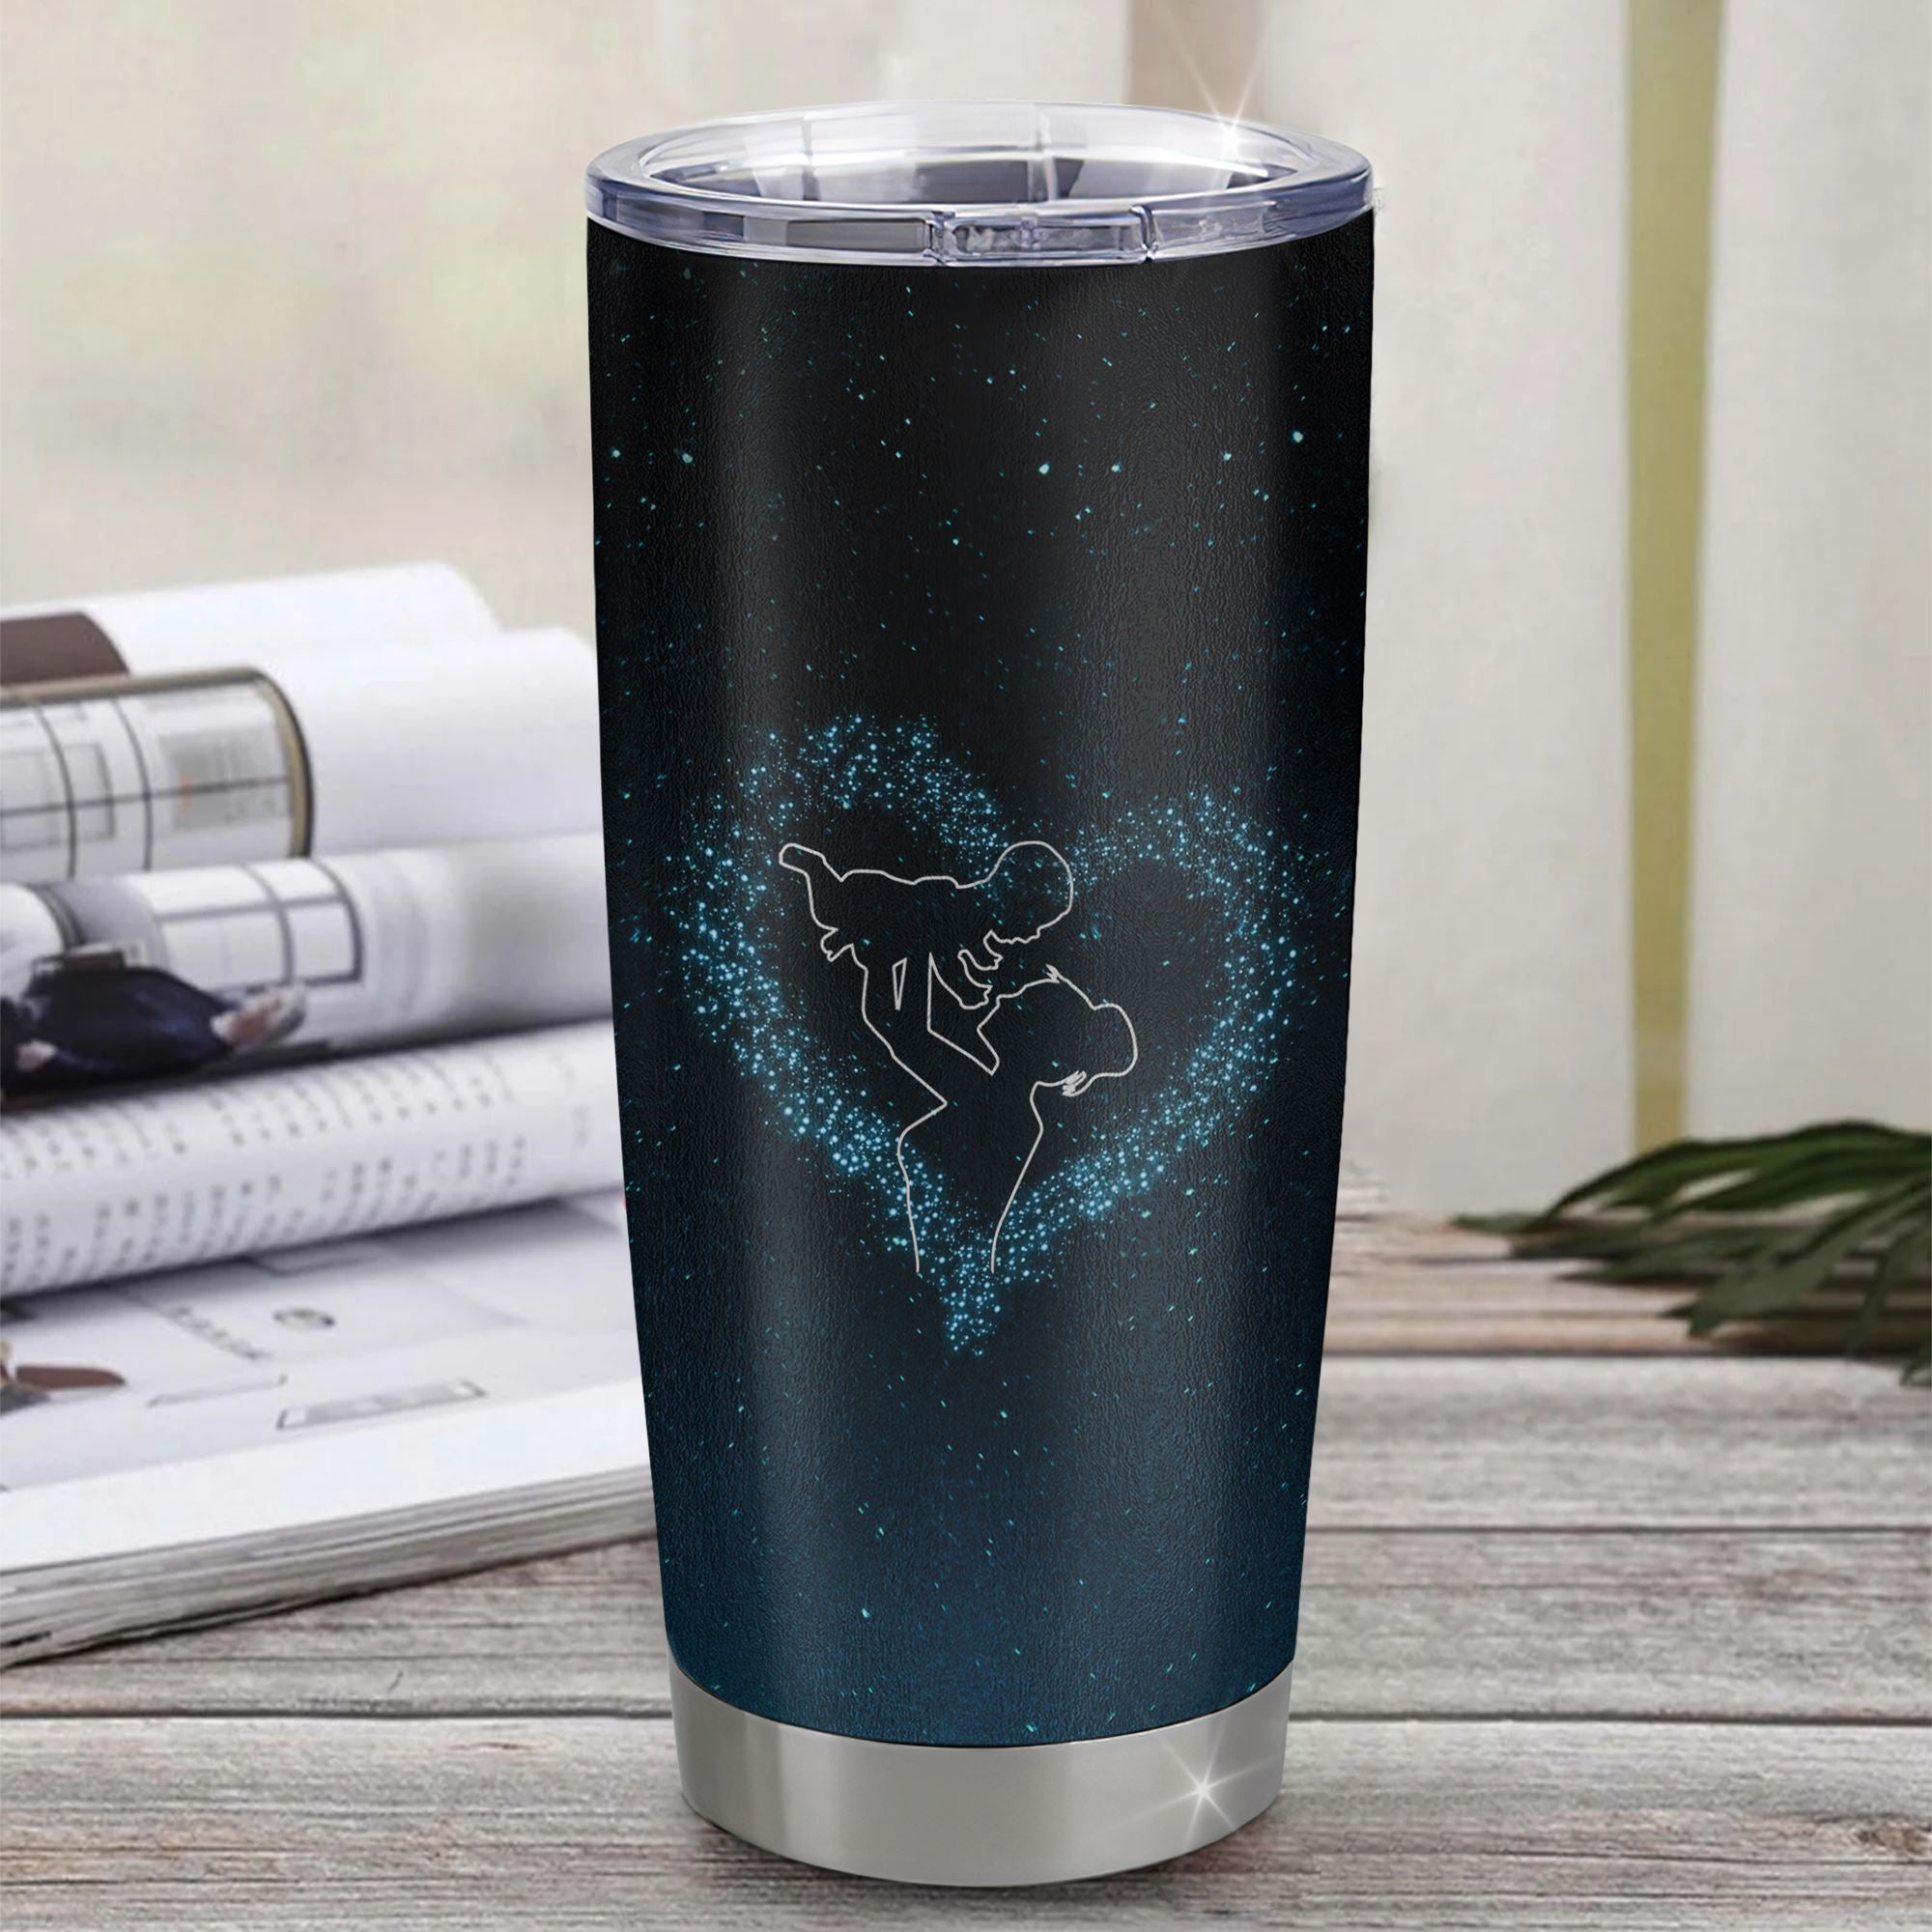 Personalized_To_My_Grandson_Tumbler_From_Grandma_Nana_Stainless_Steel_Cup_Promise_To_Love_You_Grandson_Birthday_Graduation_Christmas_Travel_Mug_Tumbler_mockup_1.jpg